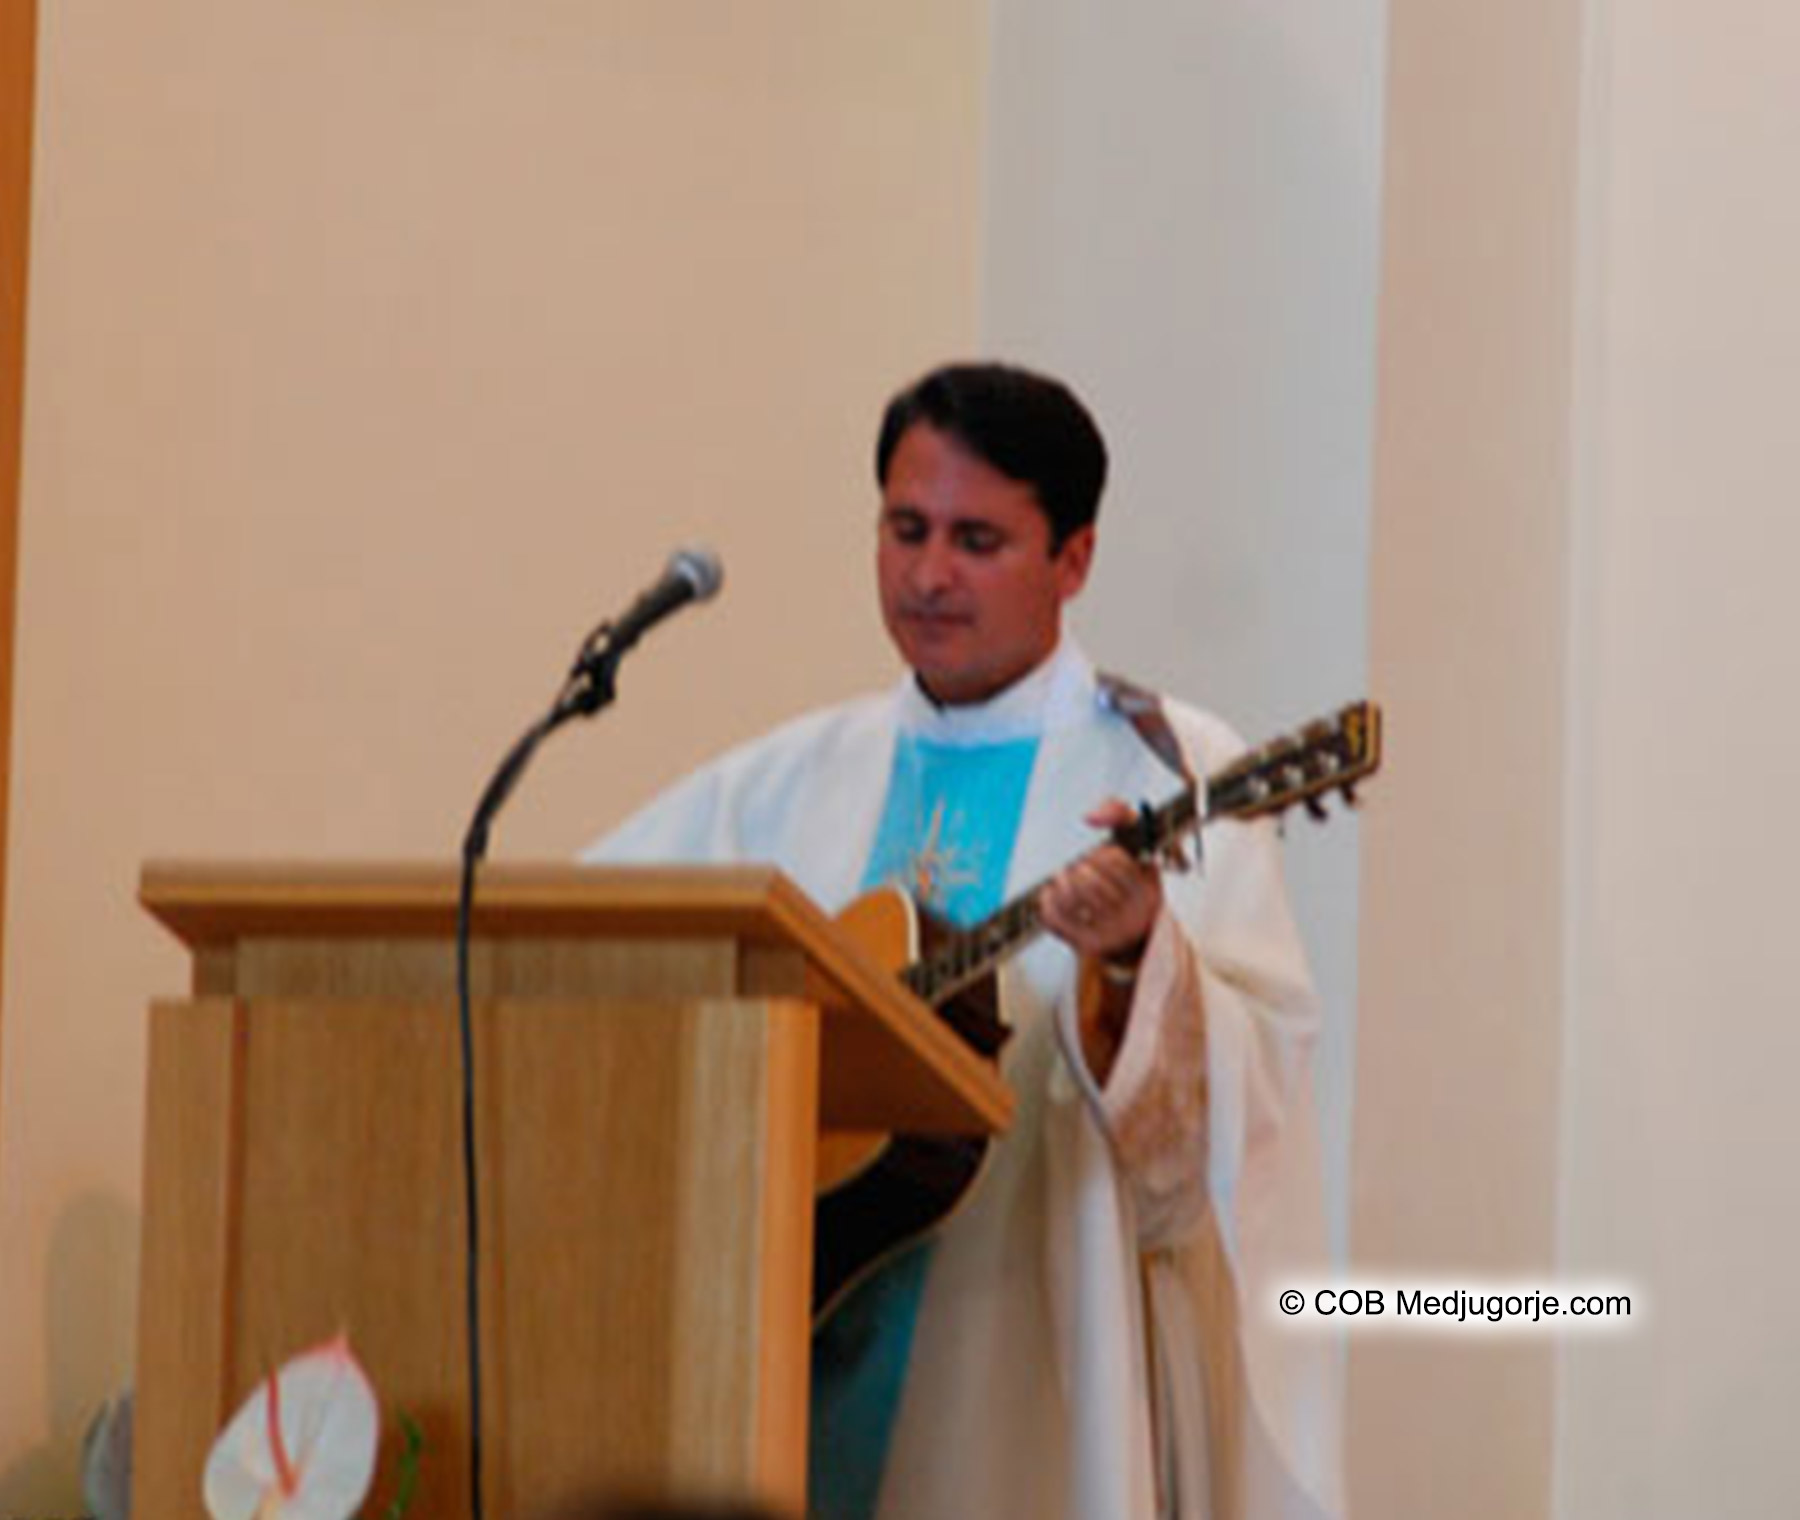 Fr. Mangano with the guitar in his hands in Medjugorje at St. James Church